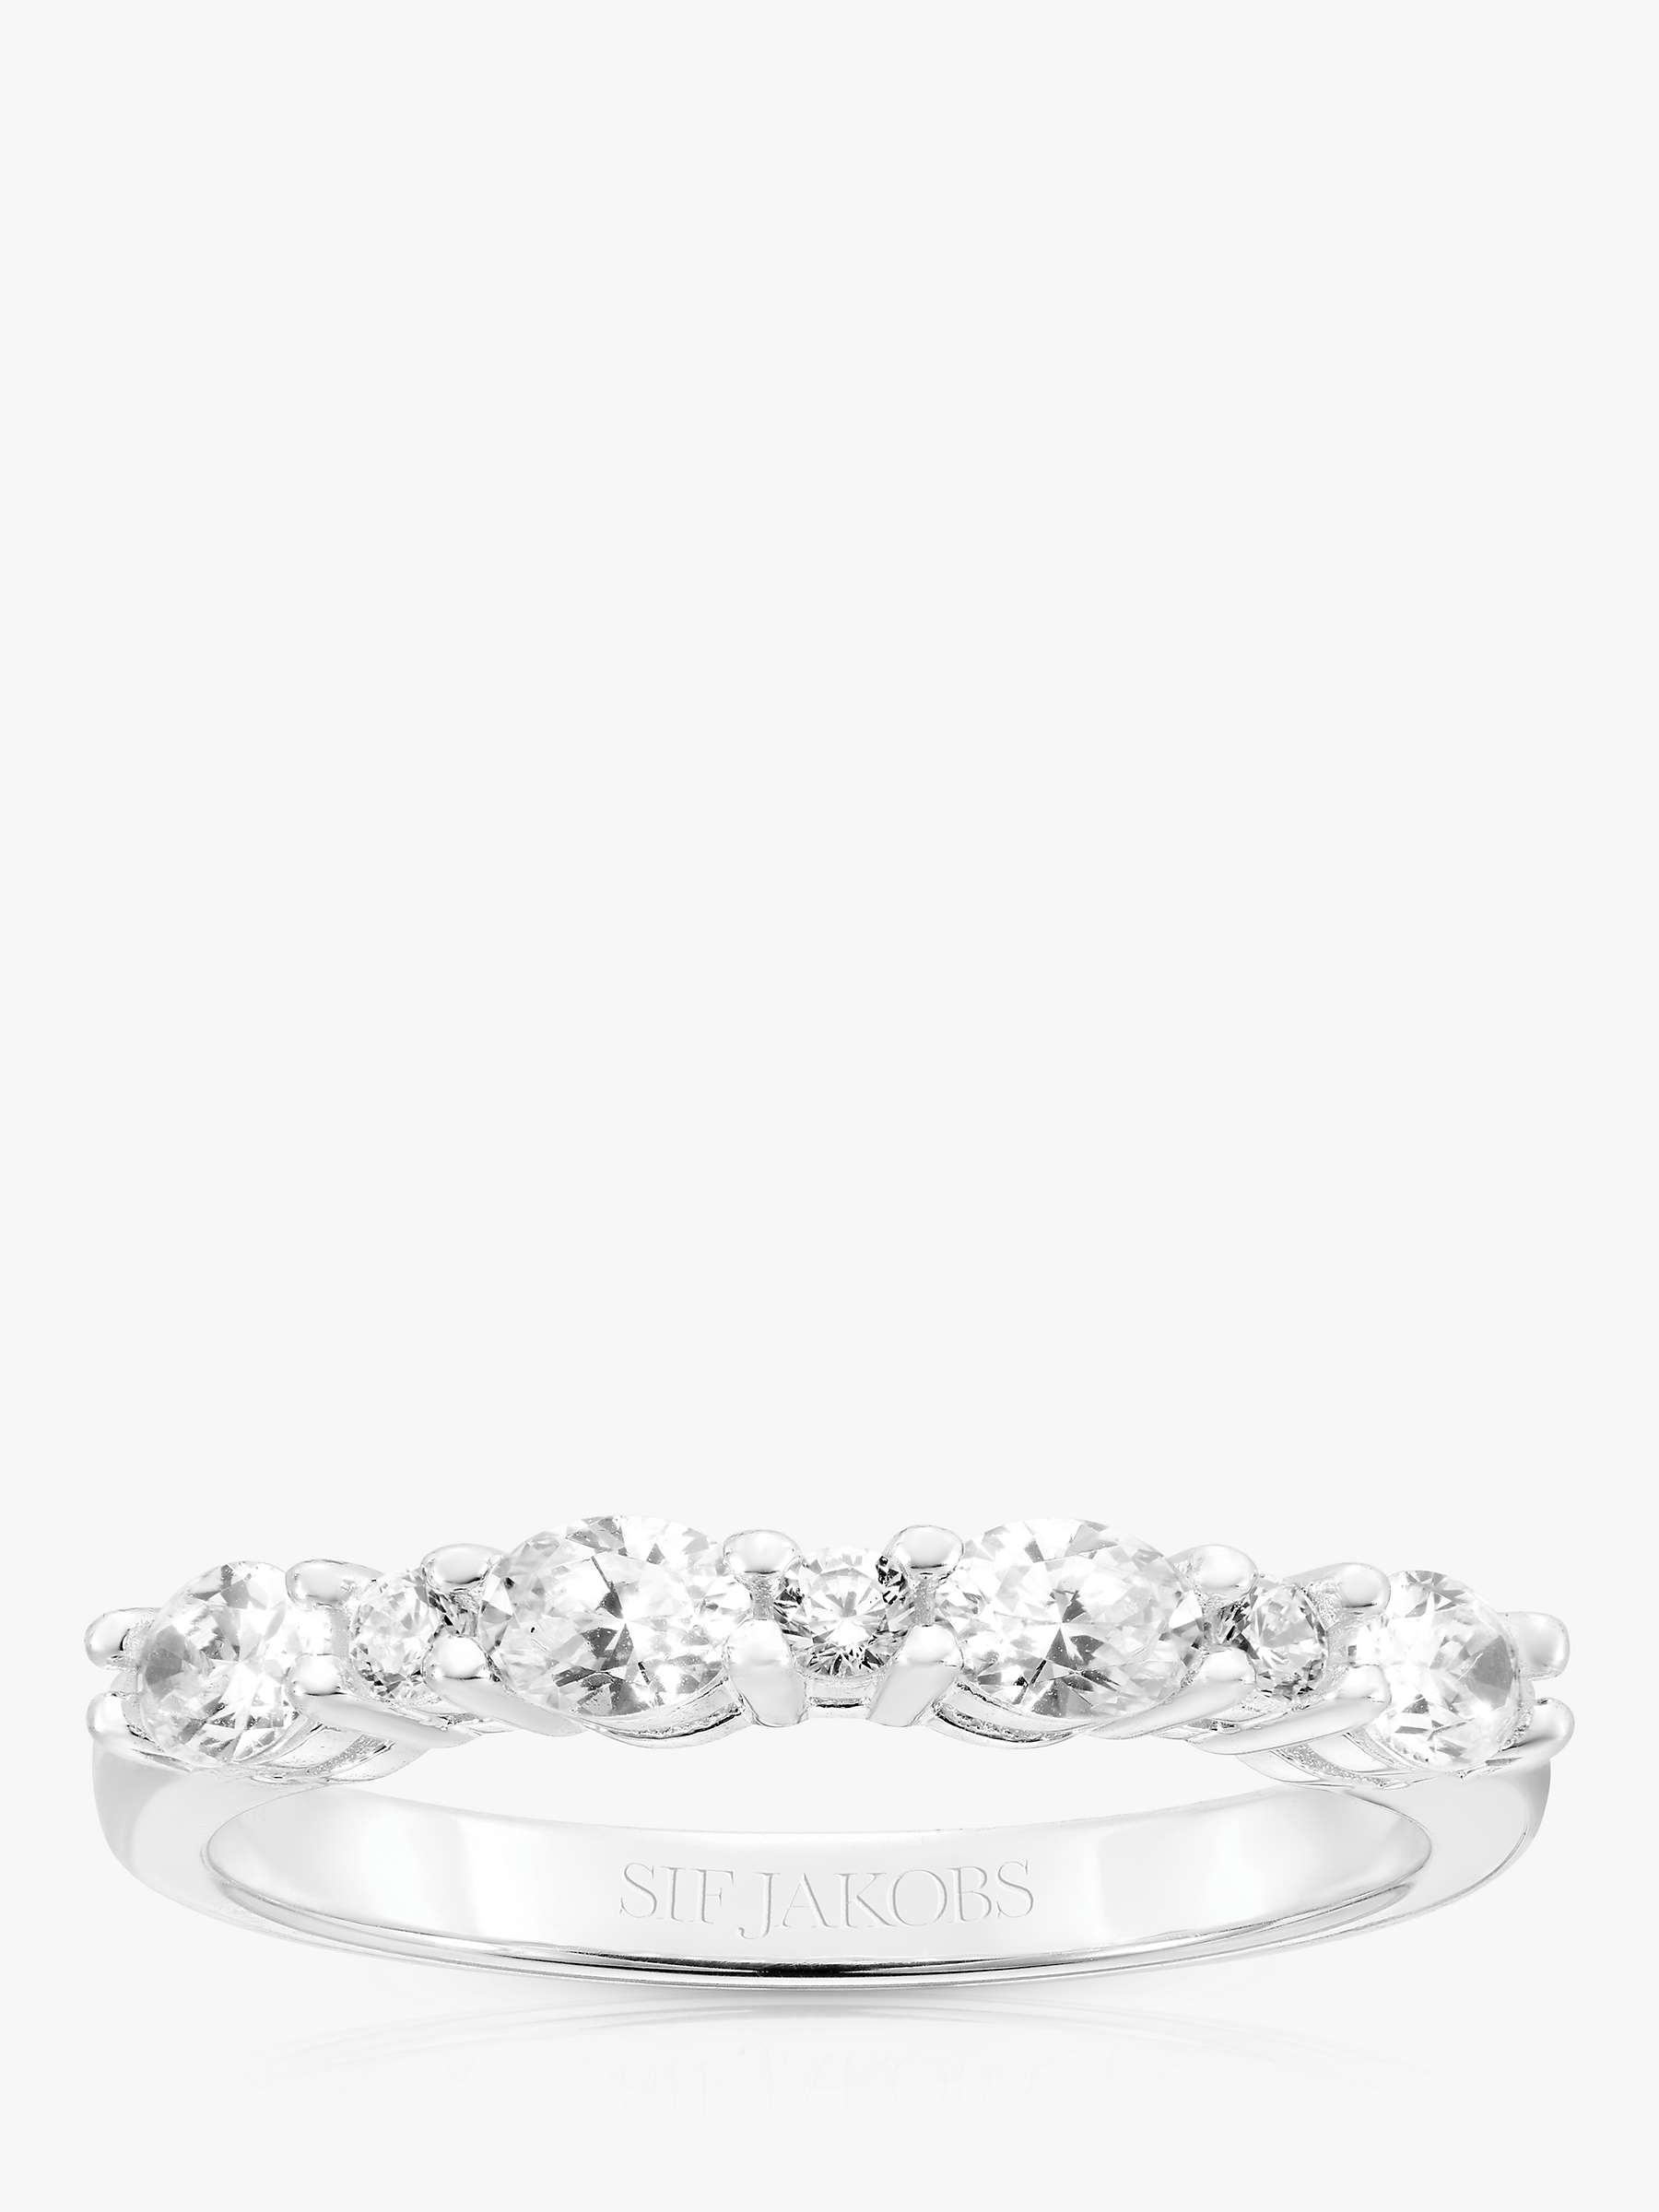 Buy Sif Jakobs Jewellery Facet Cut Cubic Zirconia Ring Online at johnlewis.com